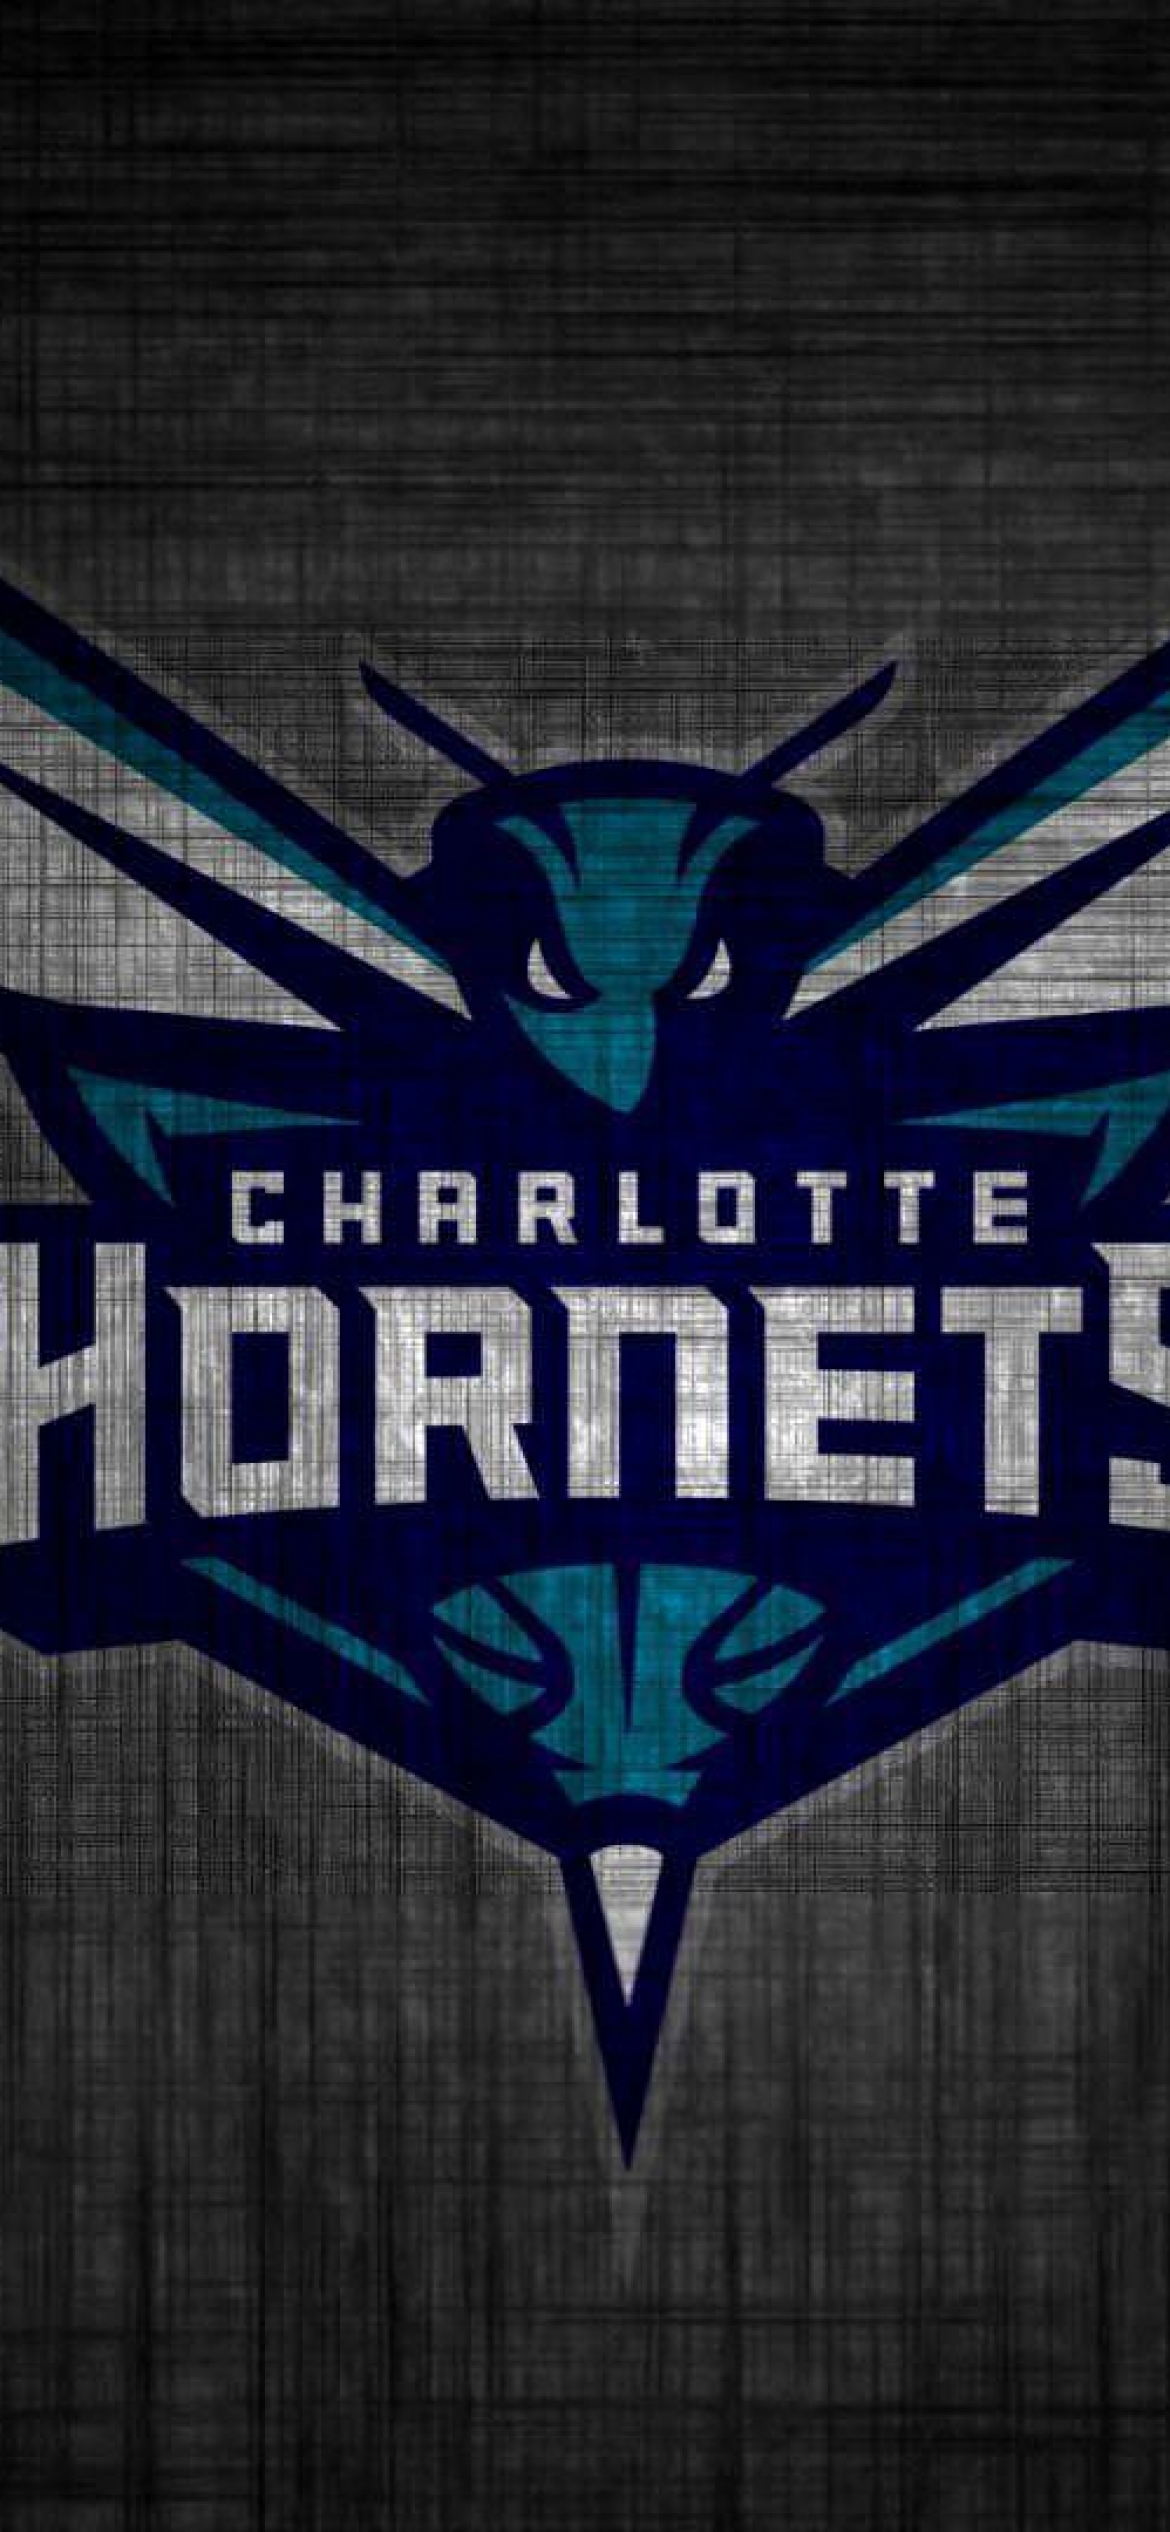 Charlotte Hornets NBA iPhone Wallpapers  iPHONE XXS11A  Flickr